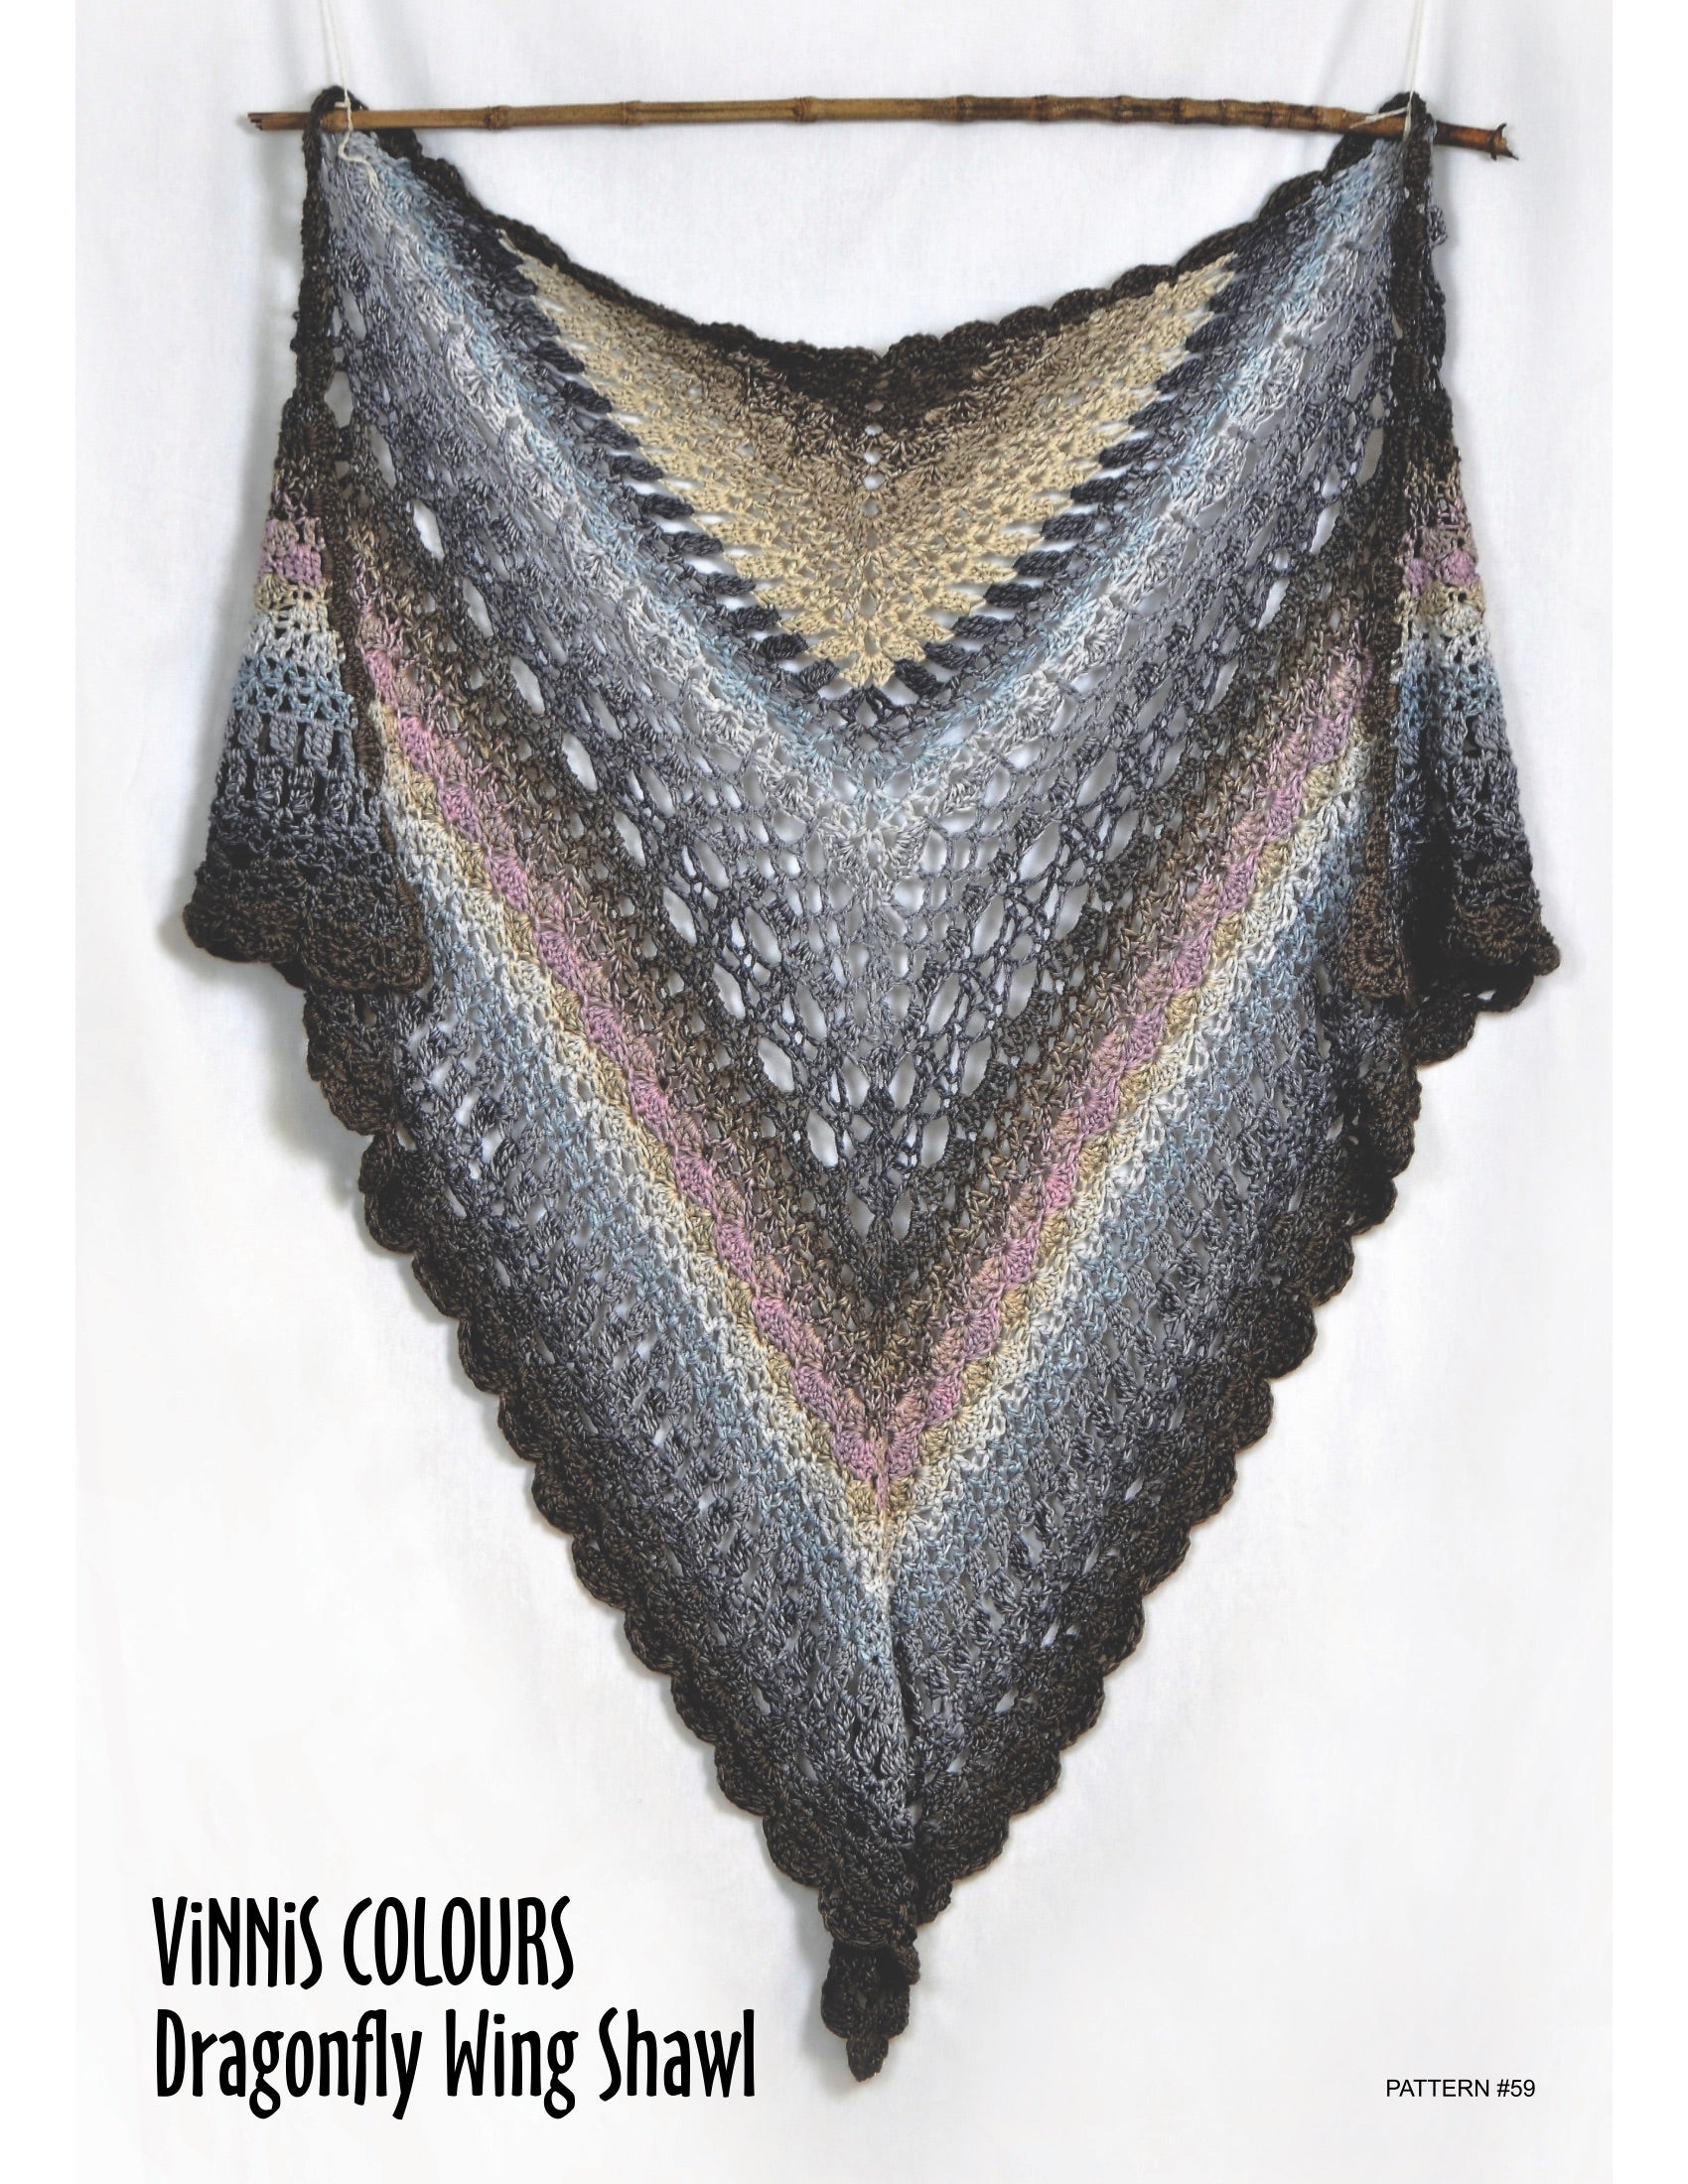 VCDL - P059 - Dragonfly Wing Shawl